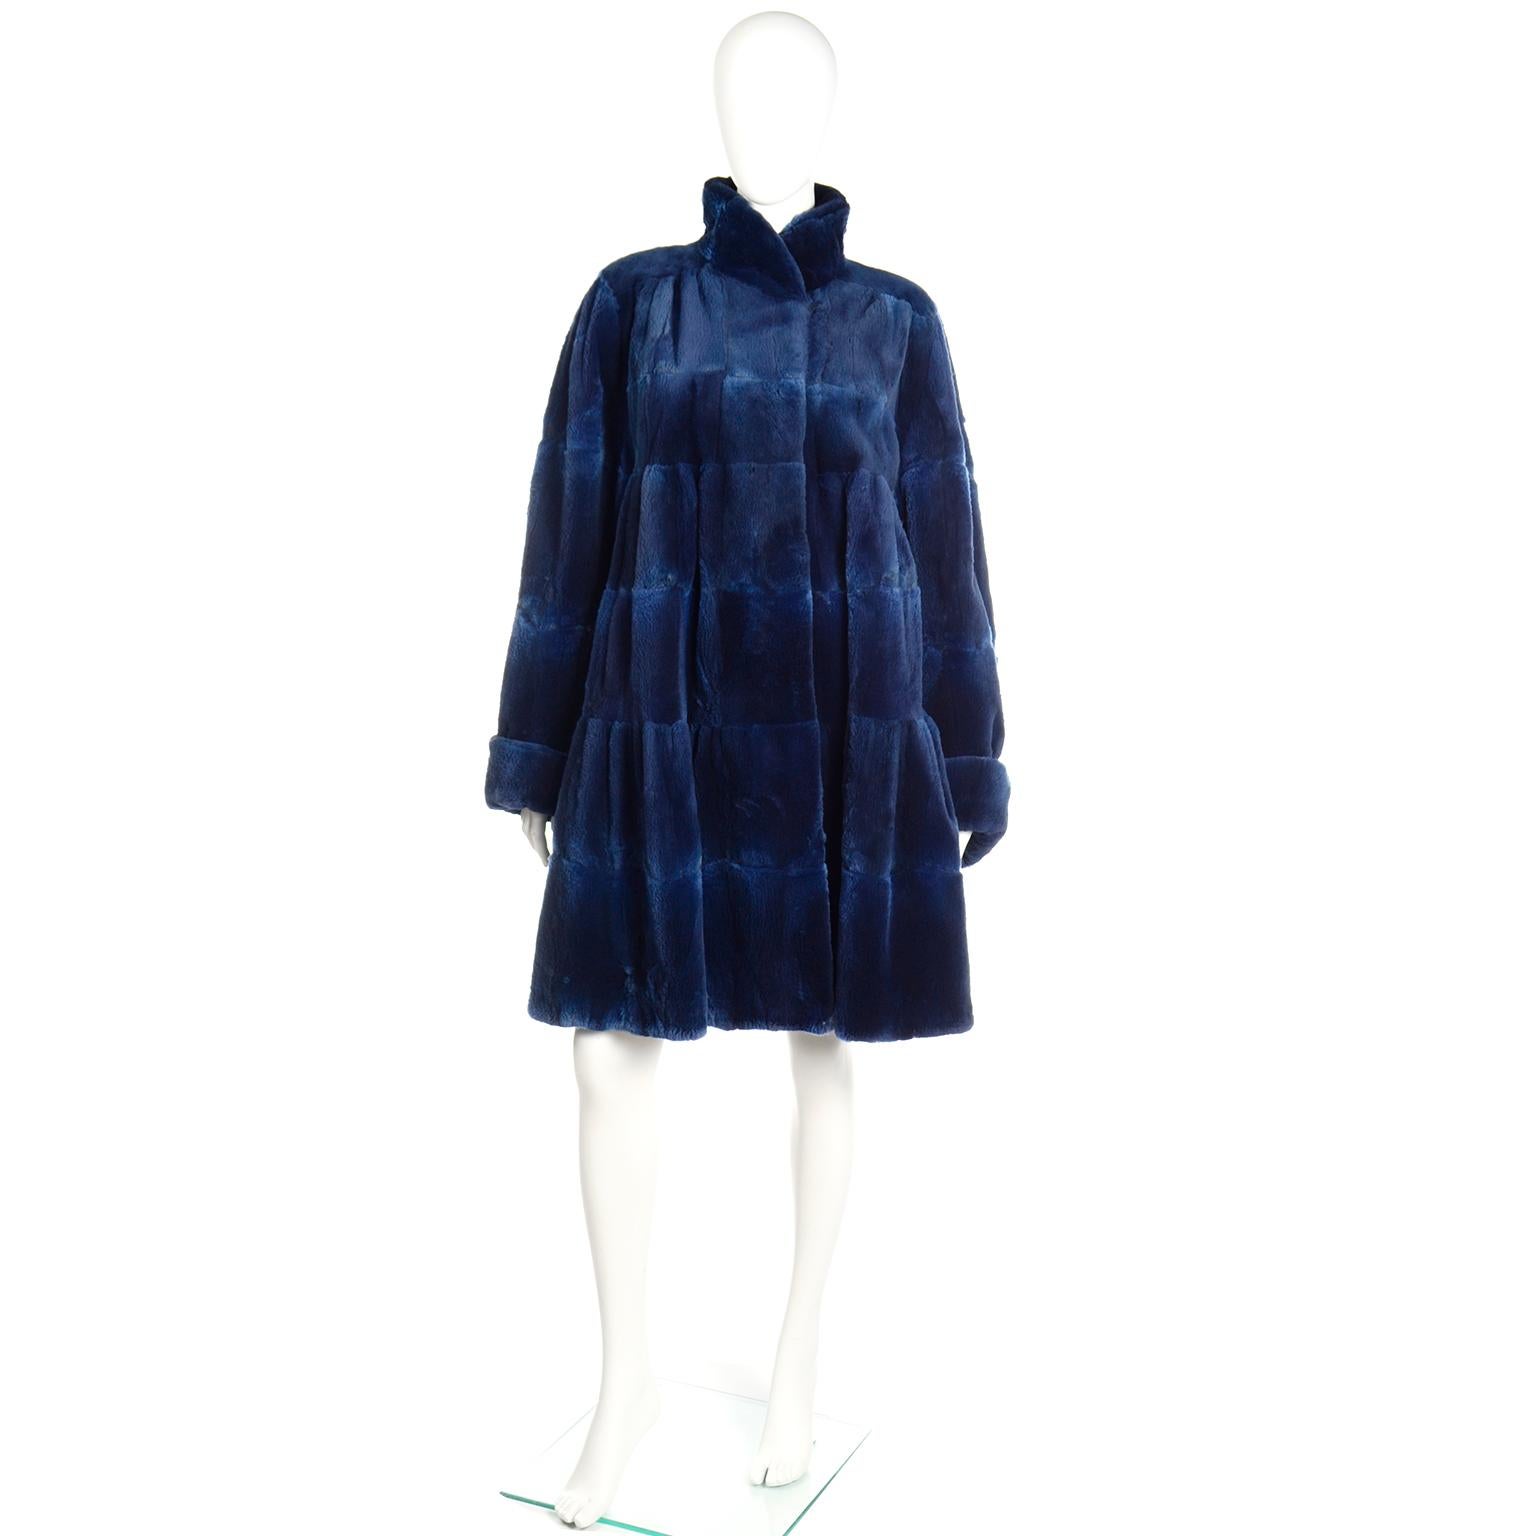 This is a really fabulous Evans Collection tiered blue sheared muskrat swing coat designed in the 1980s. This luxuriously soft vintage coat is from an estate we acquired and the original owner bought some the most beautiful designer wardrobe! This